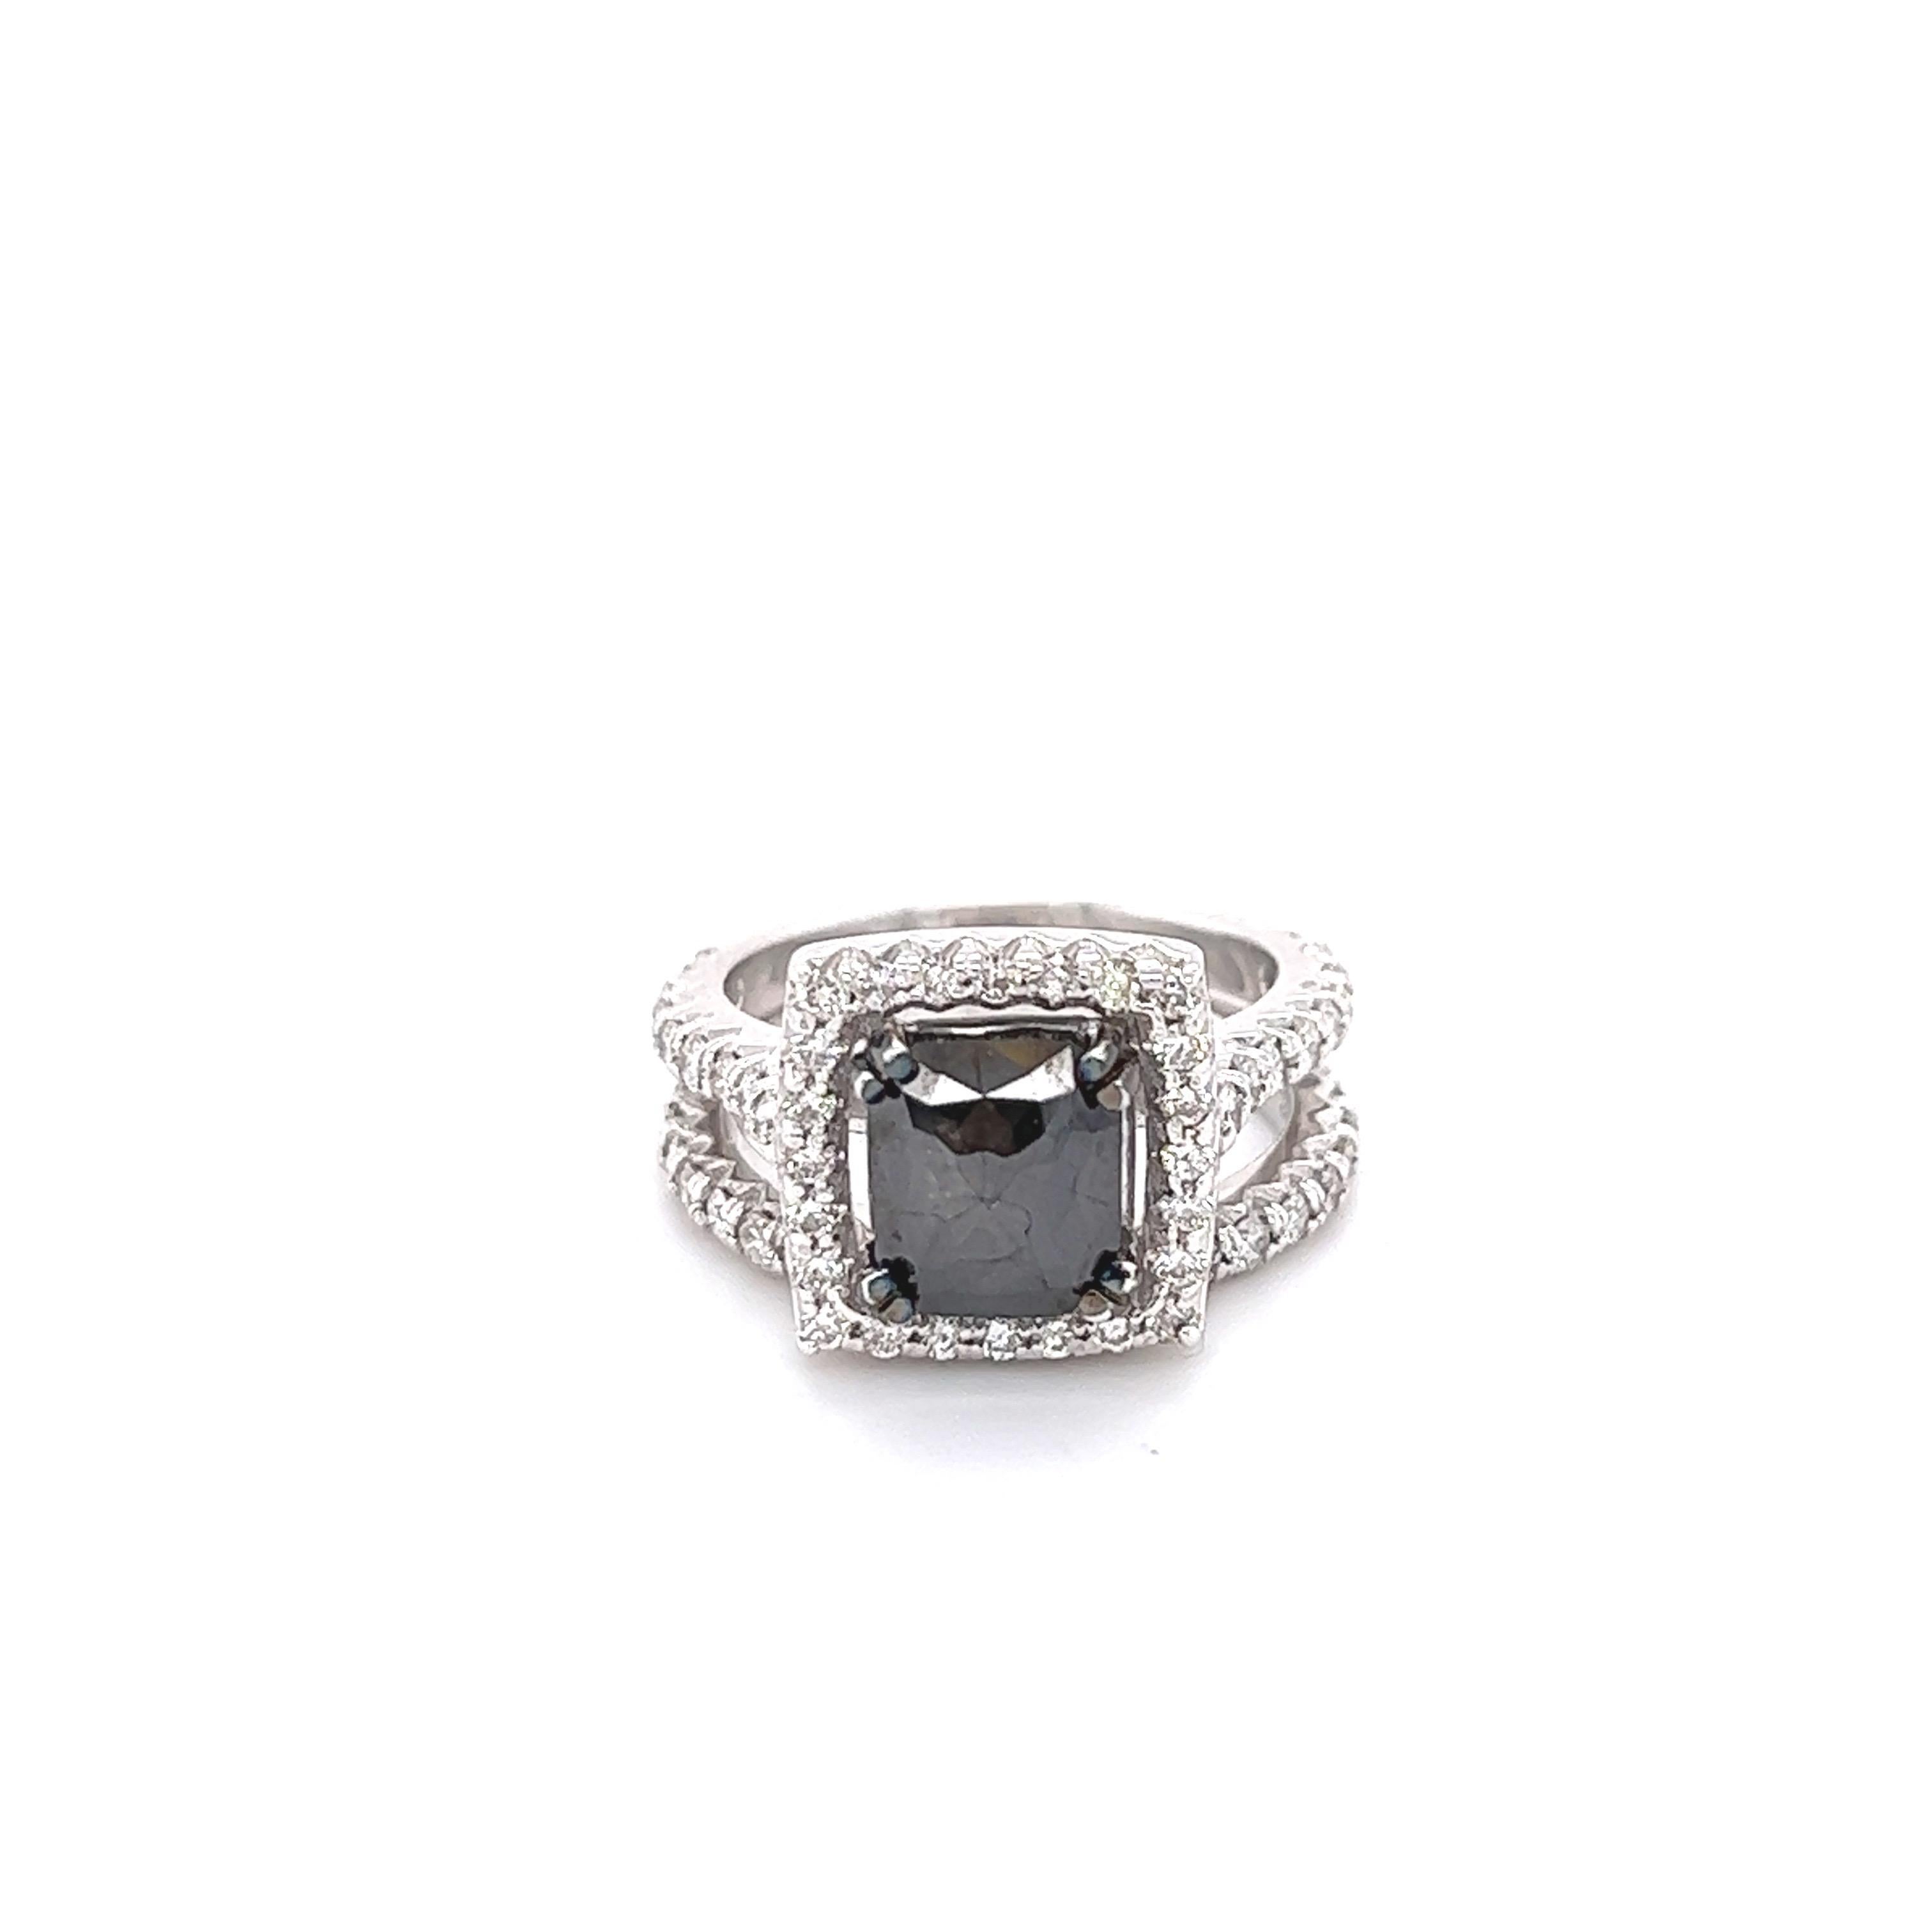 The Natural Cushion Cut Black Diamond is 2.34 Carats and is surrounded by 56 Round Cut Diamonds weighing 1.05 Carats (Clarity: VS, Color: H) The total carat weight of the ring is 3.39 Carats. The Black Diamond measures at approximately 9 mm x 7 mm.